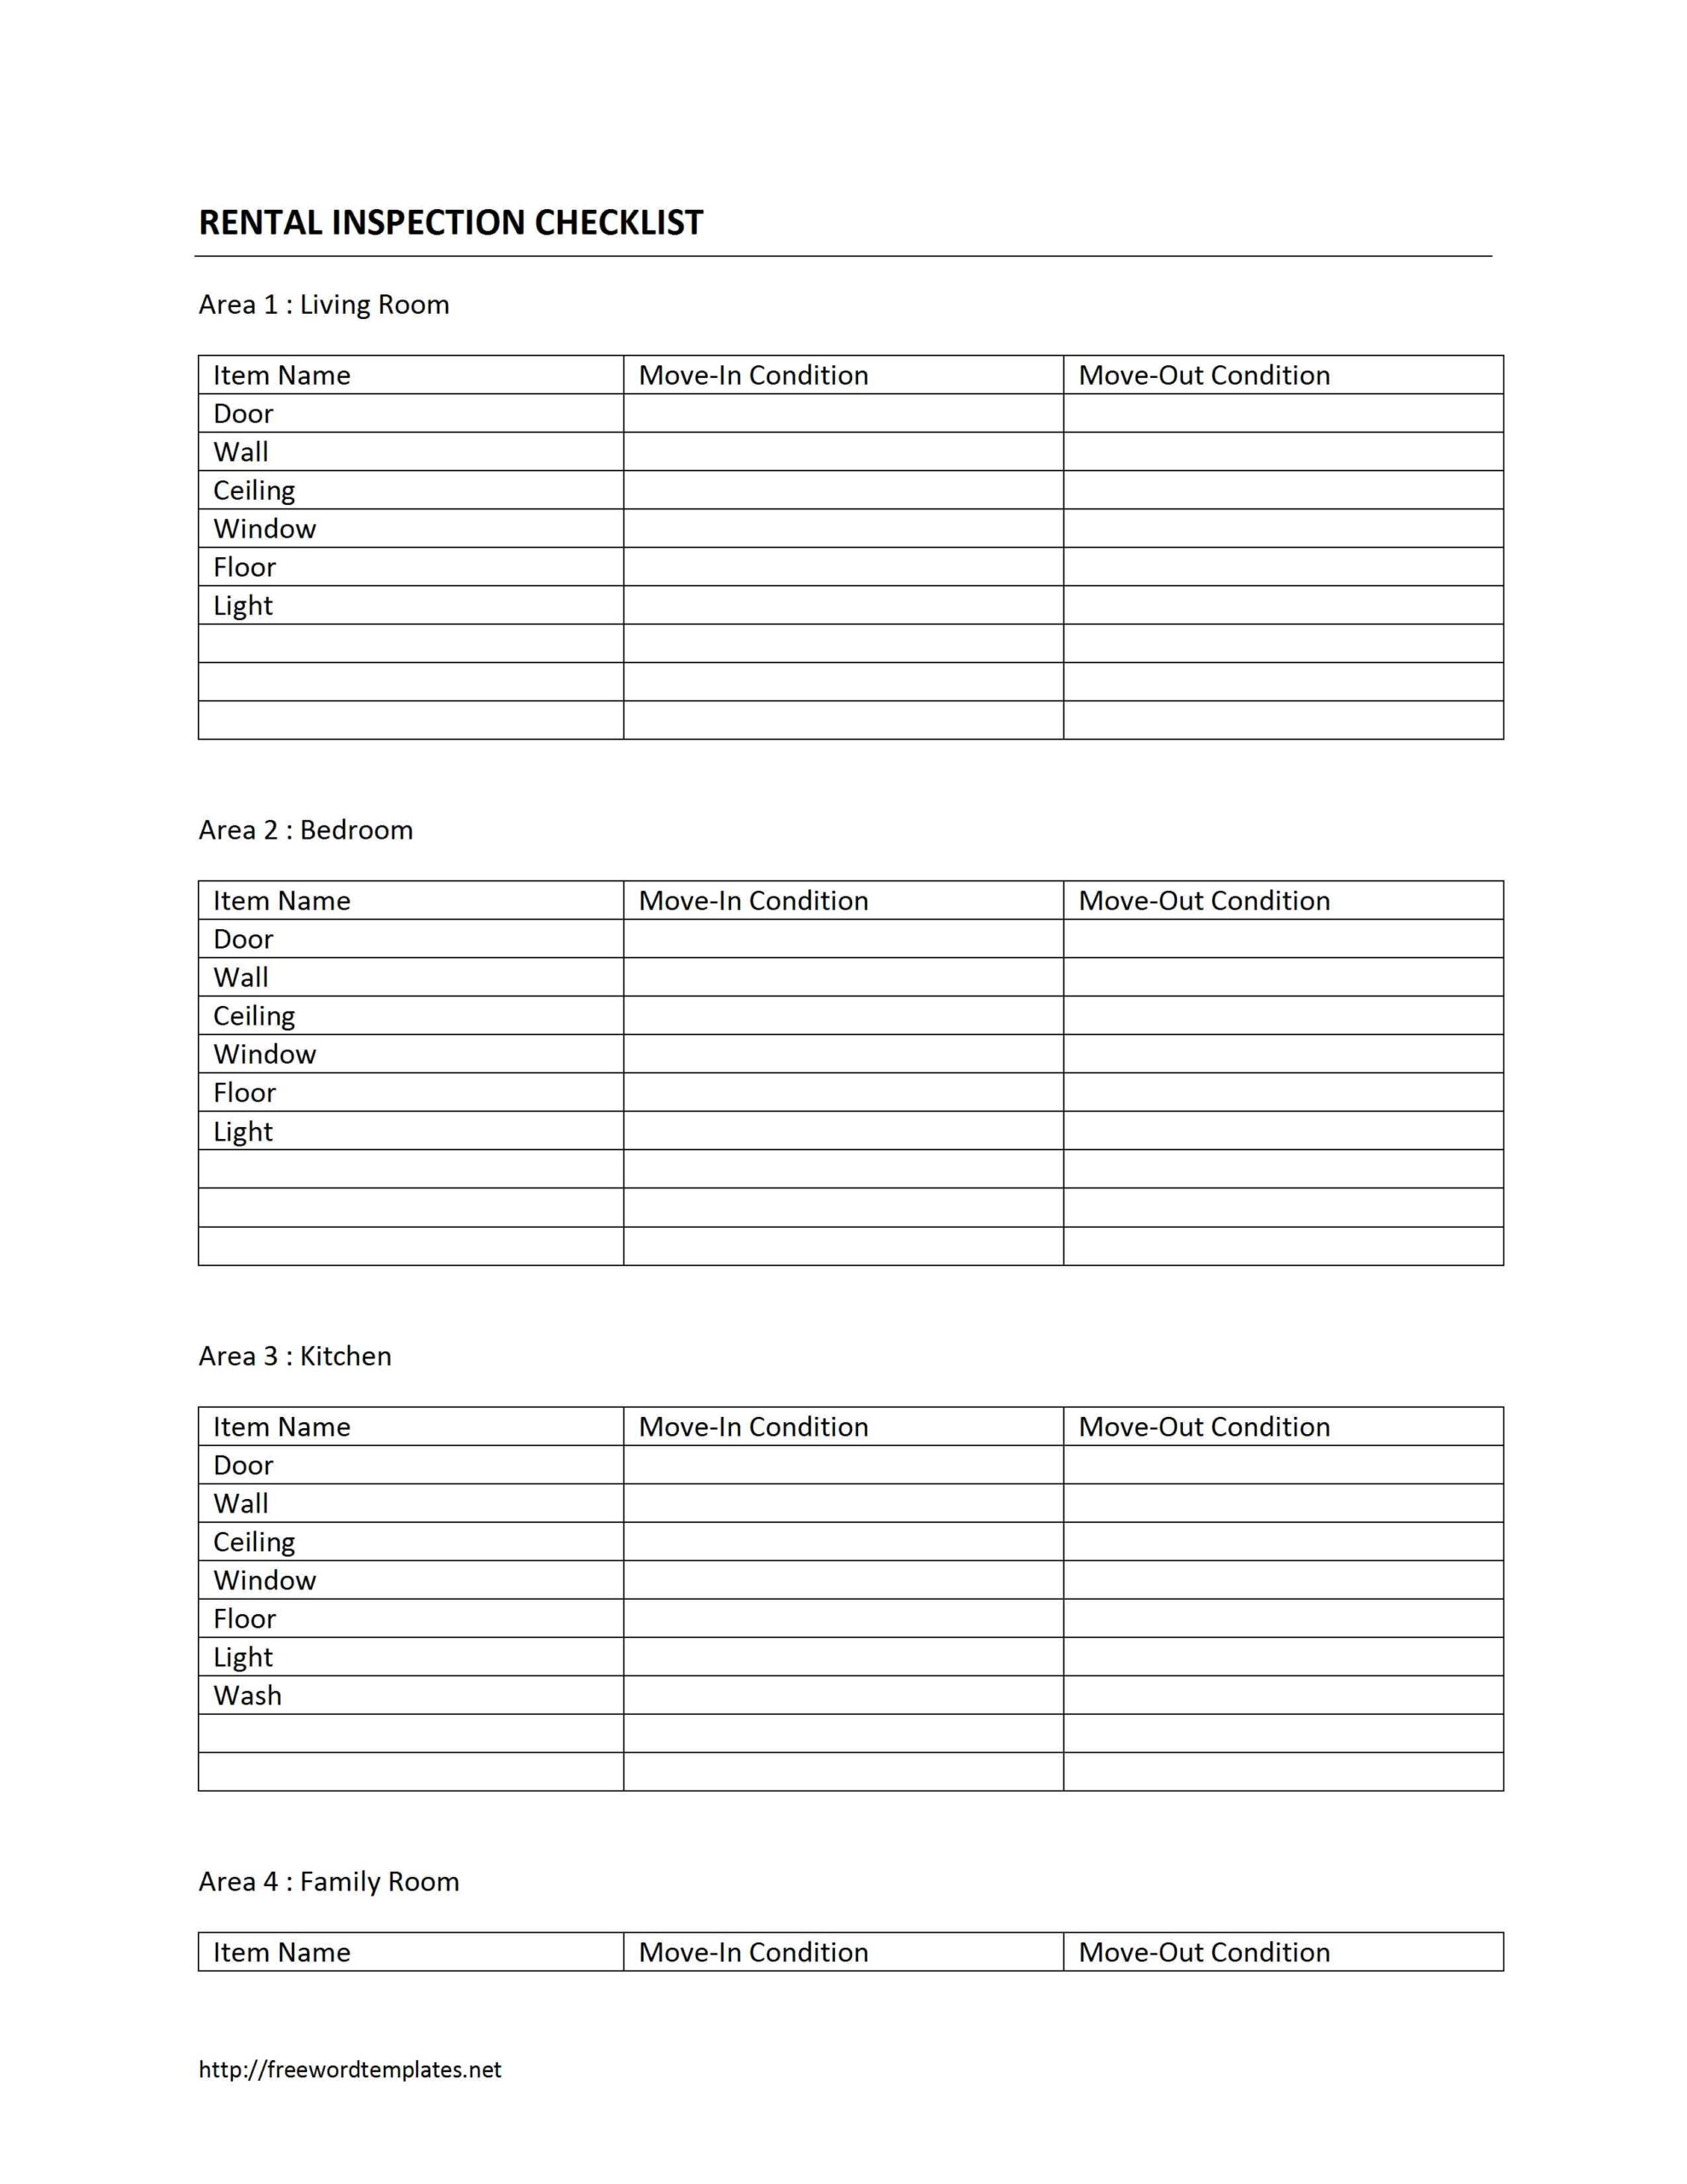 Home Rental Inspection Checklist Template Throughout Rental Inspection Checklist Template Inside Rental Inspection Checklist Template